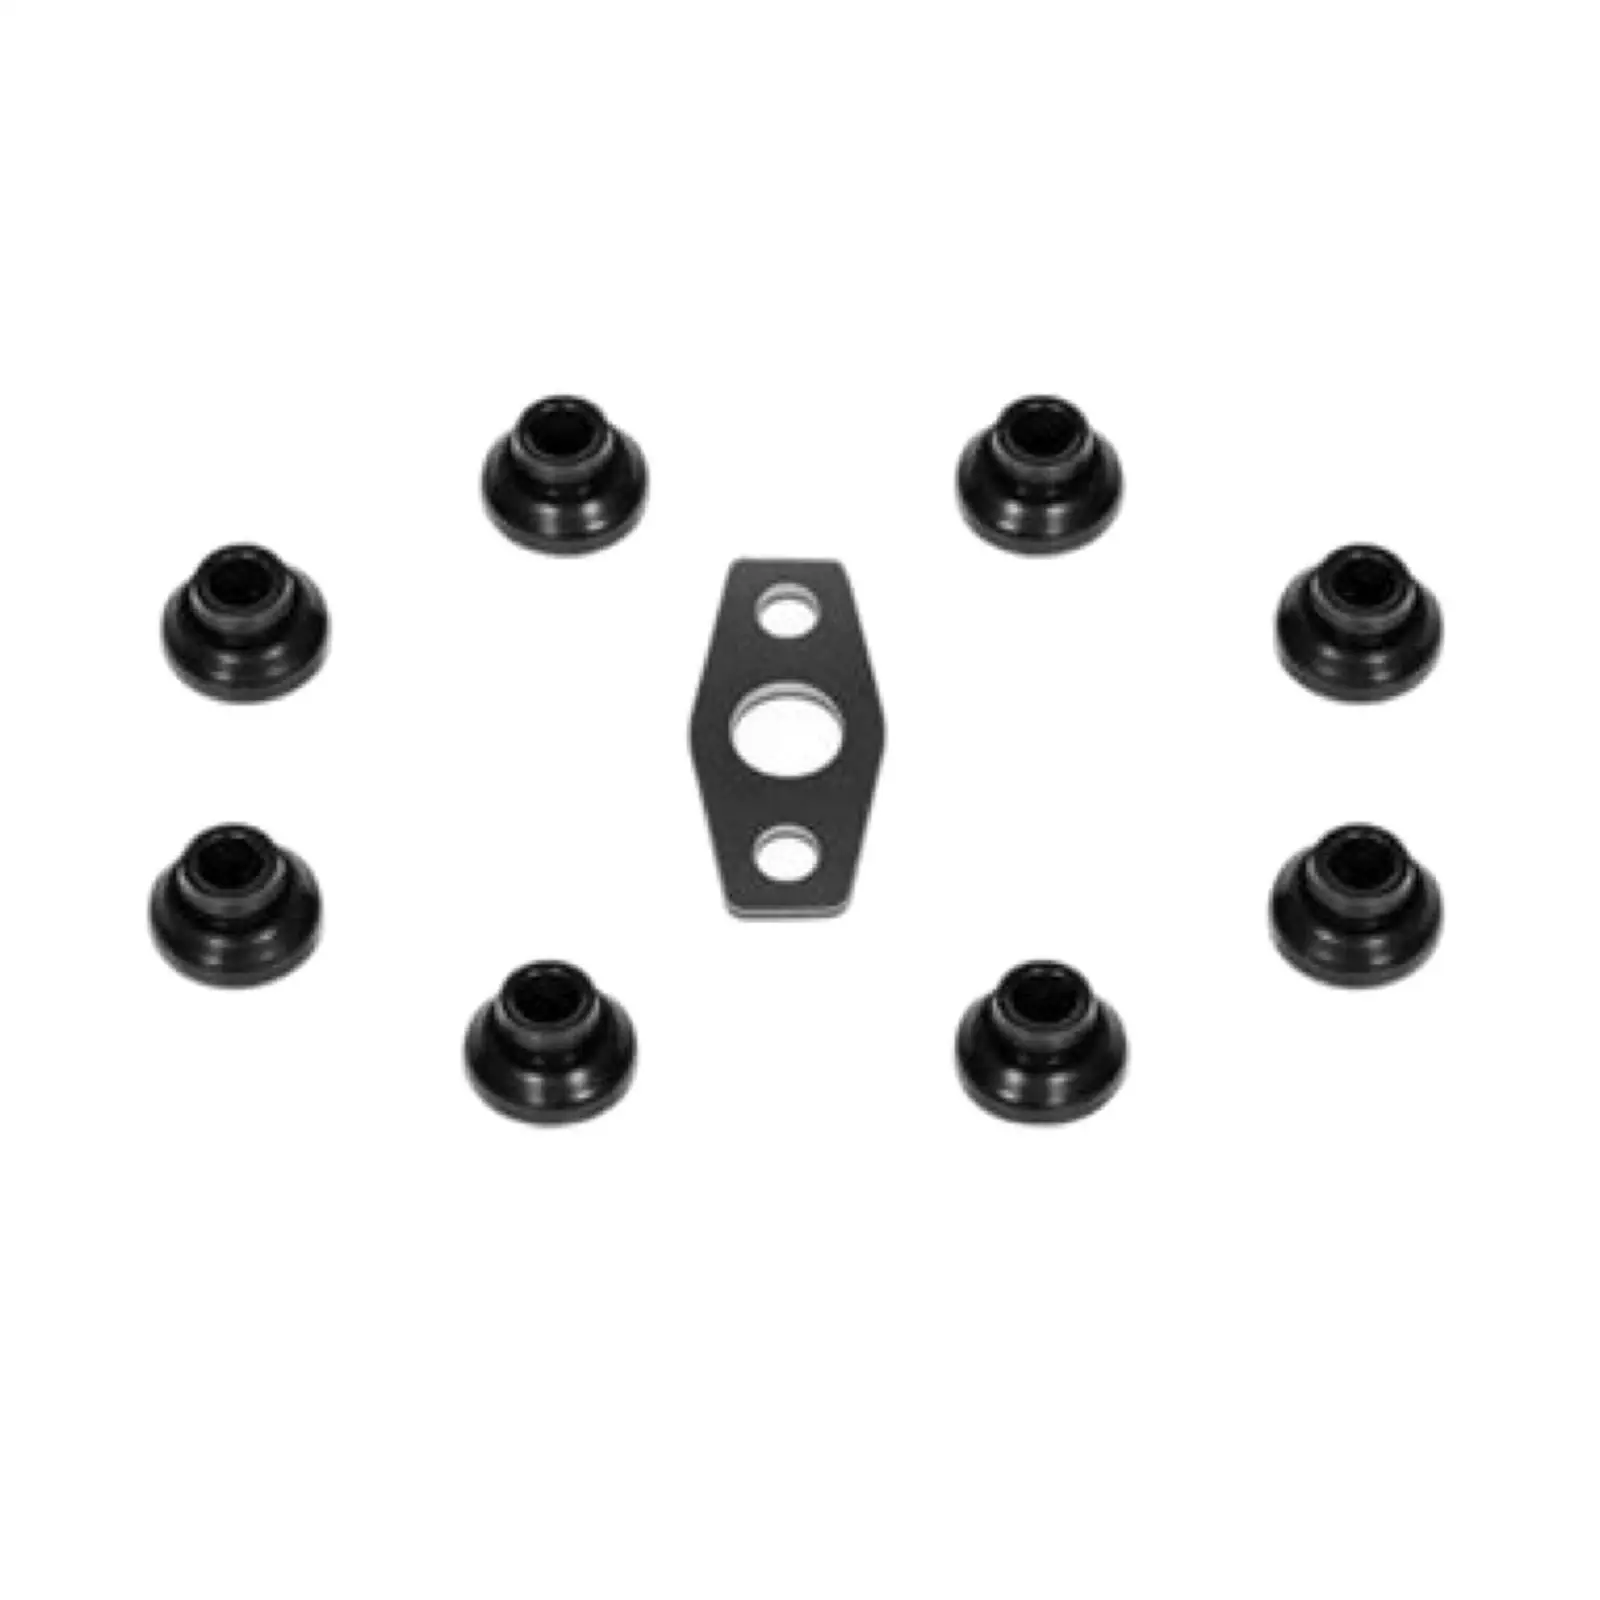 car Valve Cover Gasket Kits Replacement for GM 4.8L 5.3L Durable